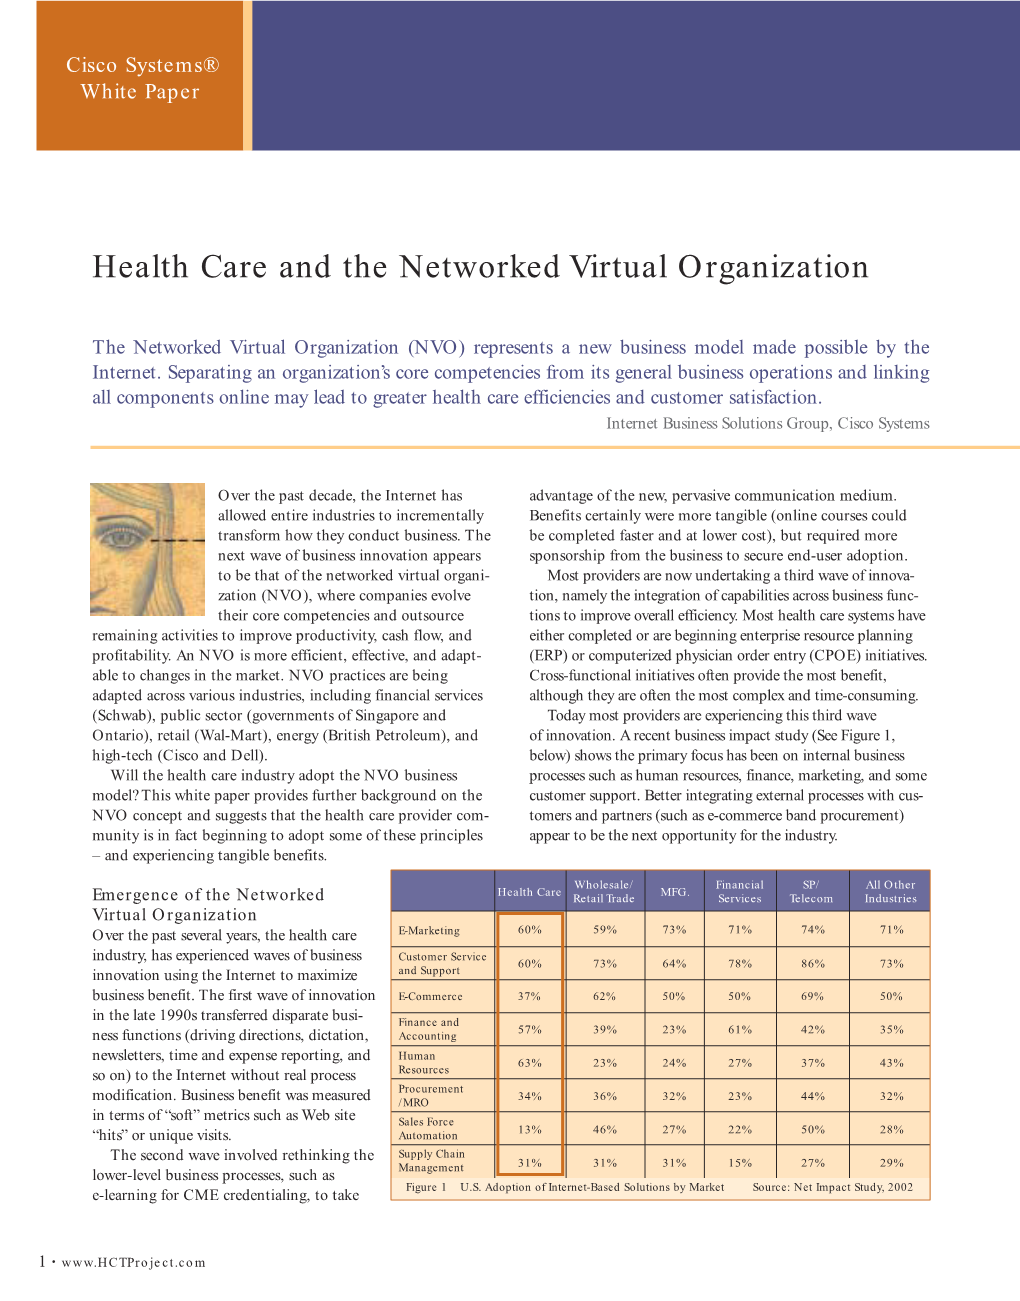 Health Care and the Networked Virtual Organization